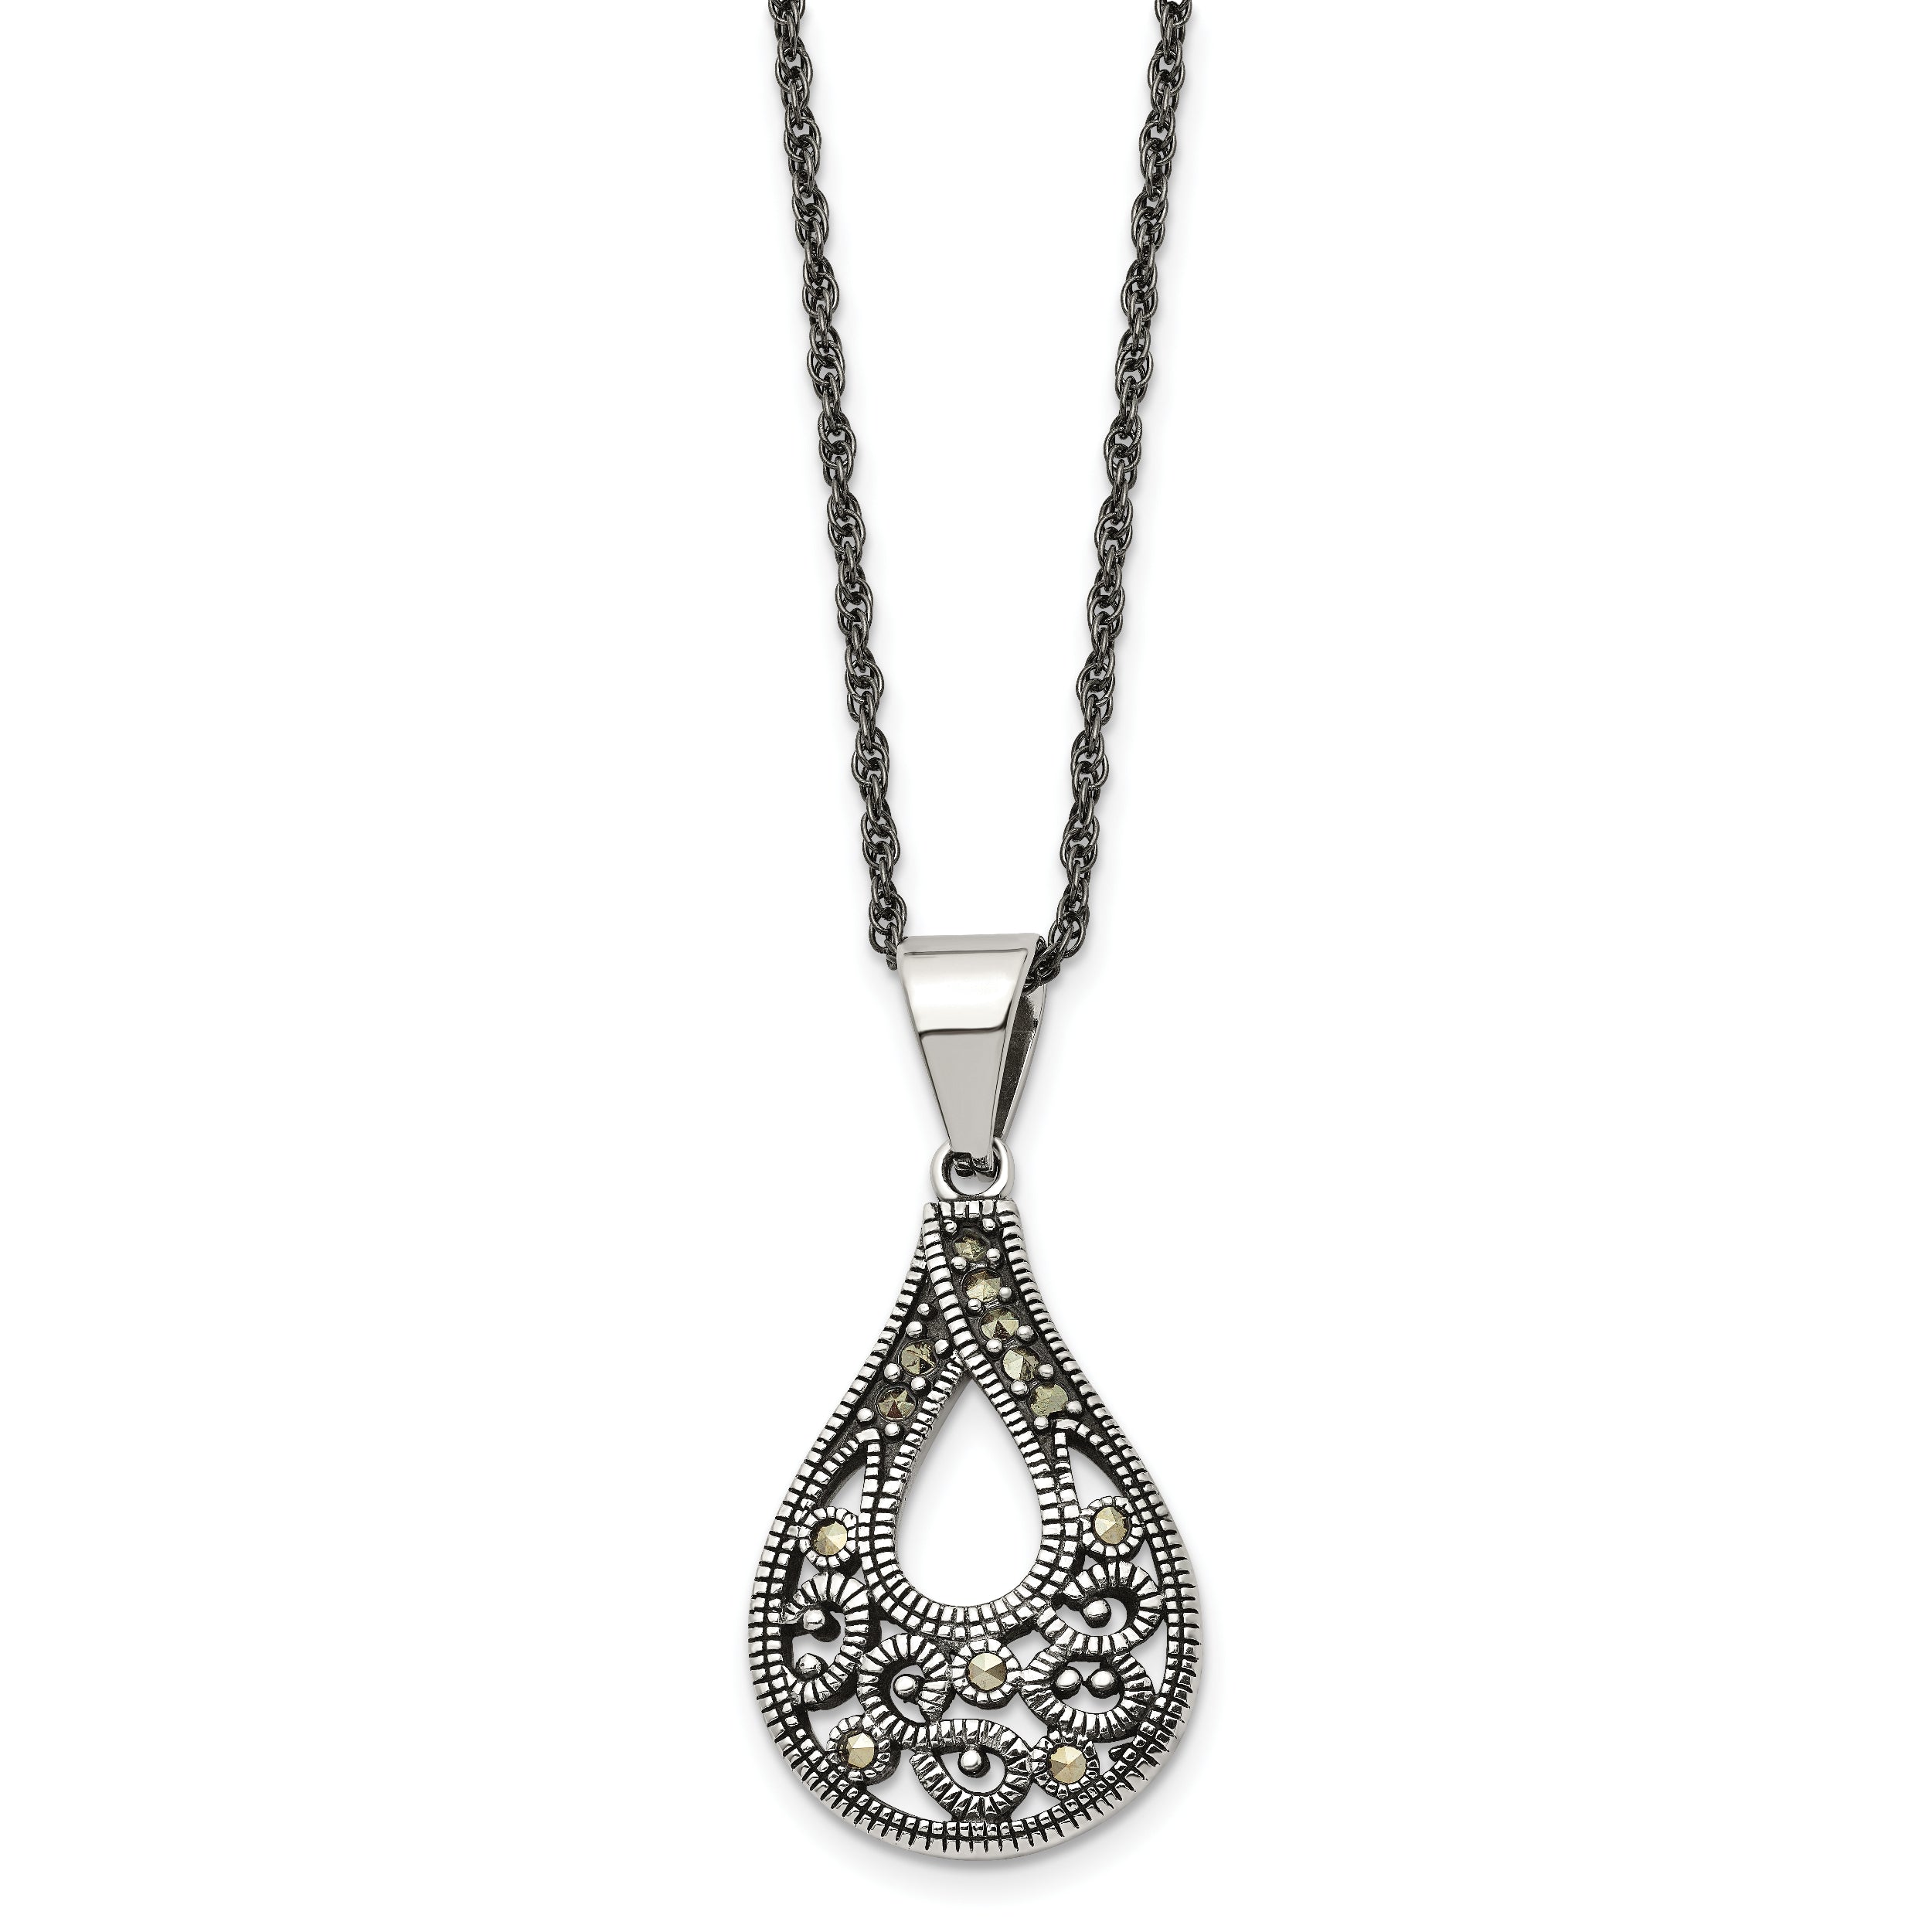 Chisel Stainless Steel Antiqued, Polished and Textured Marcasite Teardrop Pendant on a 20 inch Singapore Chain Necklace